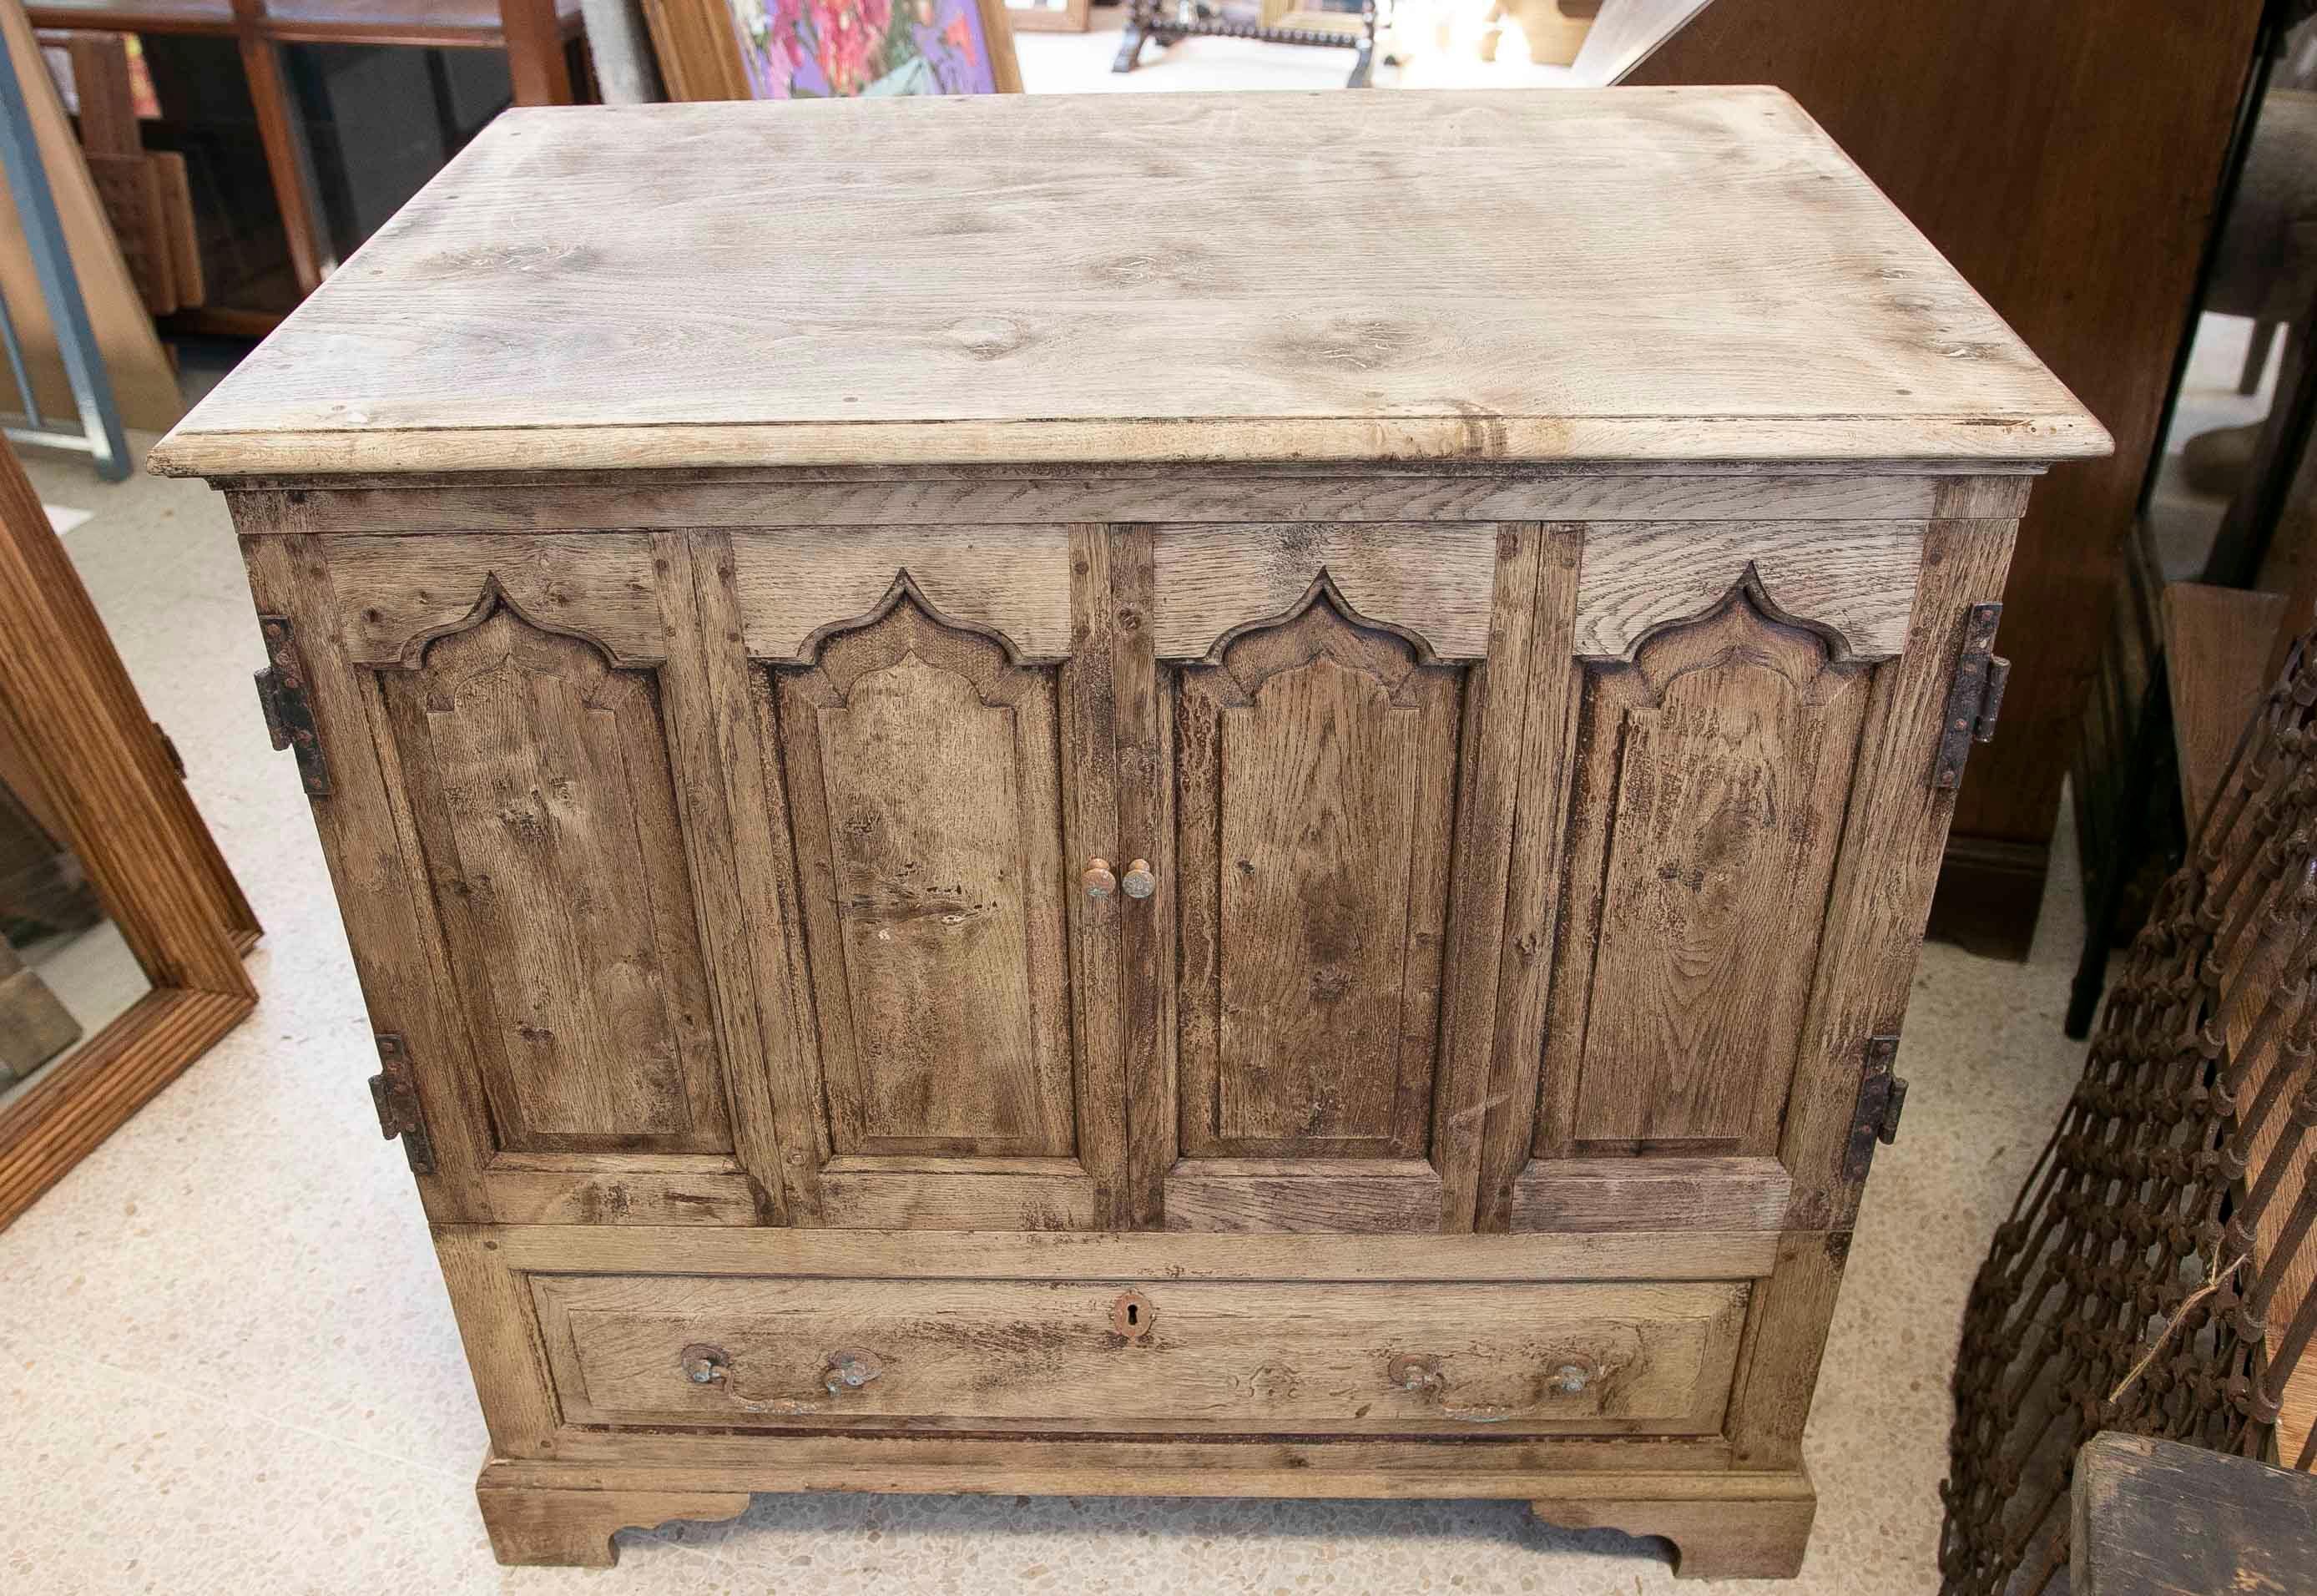 19th Century English Furniture with Doors and Drawer in the Tone of its Wood For Sale 1